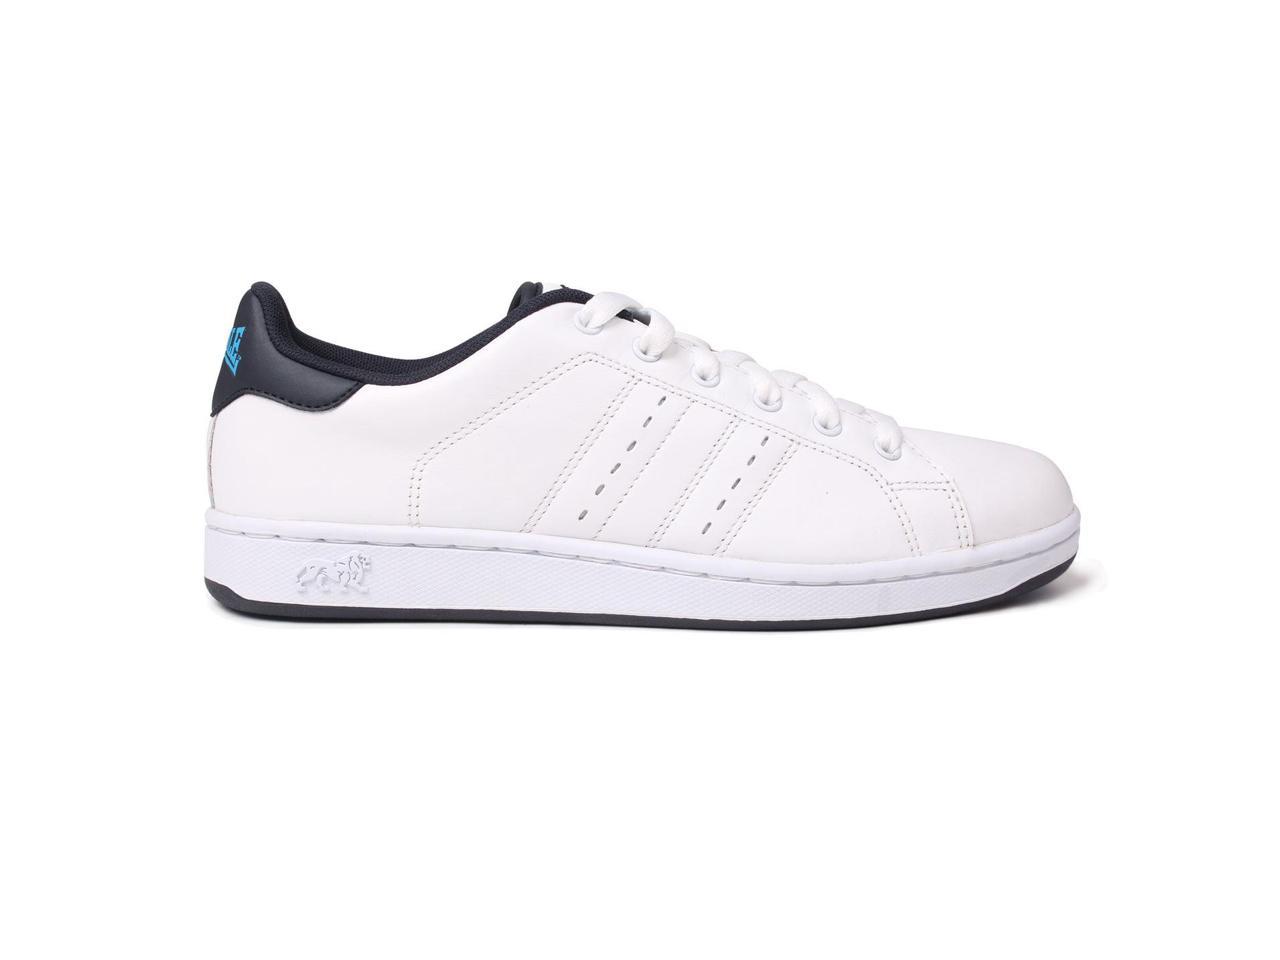 Lonsdale Womens Leyton Ladies Trainers Sport Shoes Leather Upper Casual Footwear 